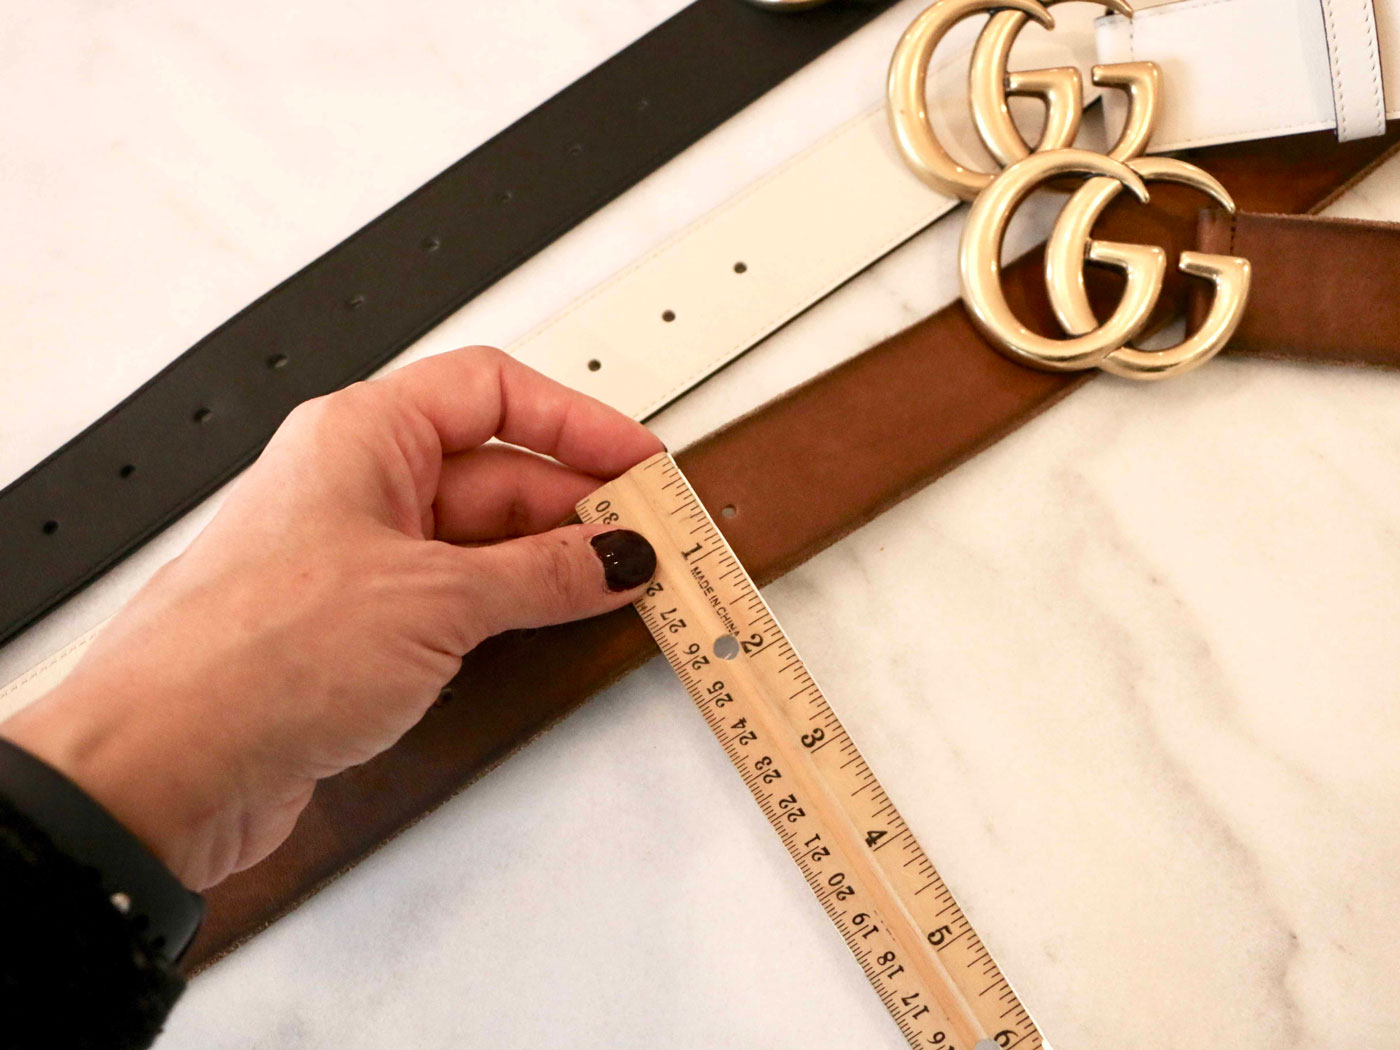 Gucci Marmont Belt - Sizing and Adding More Holes